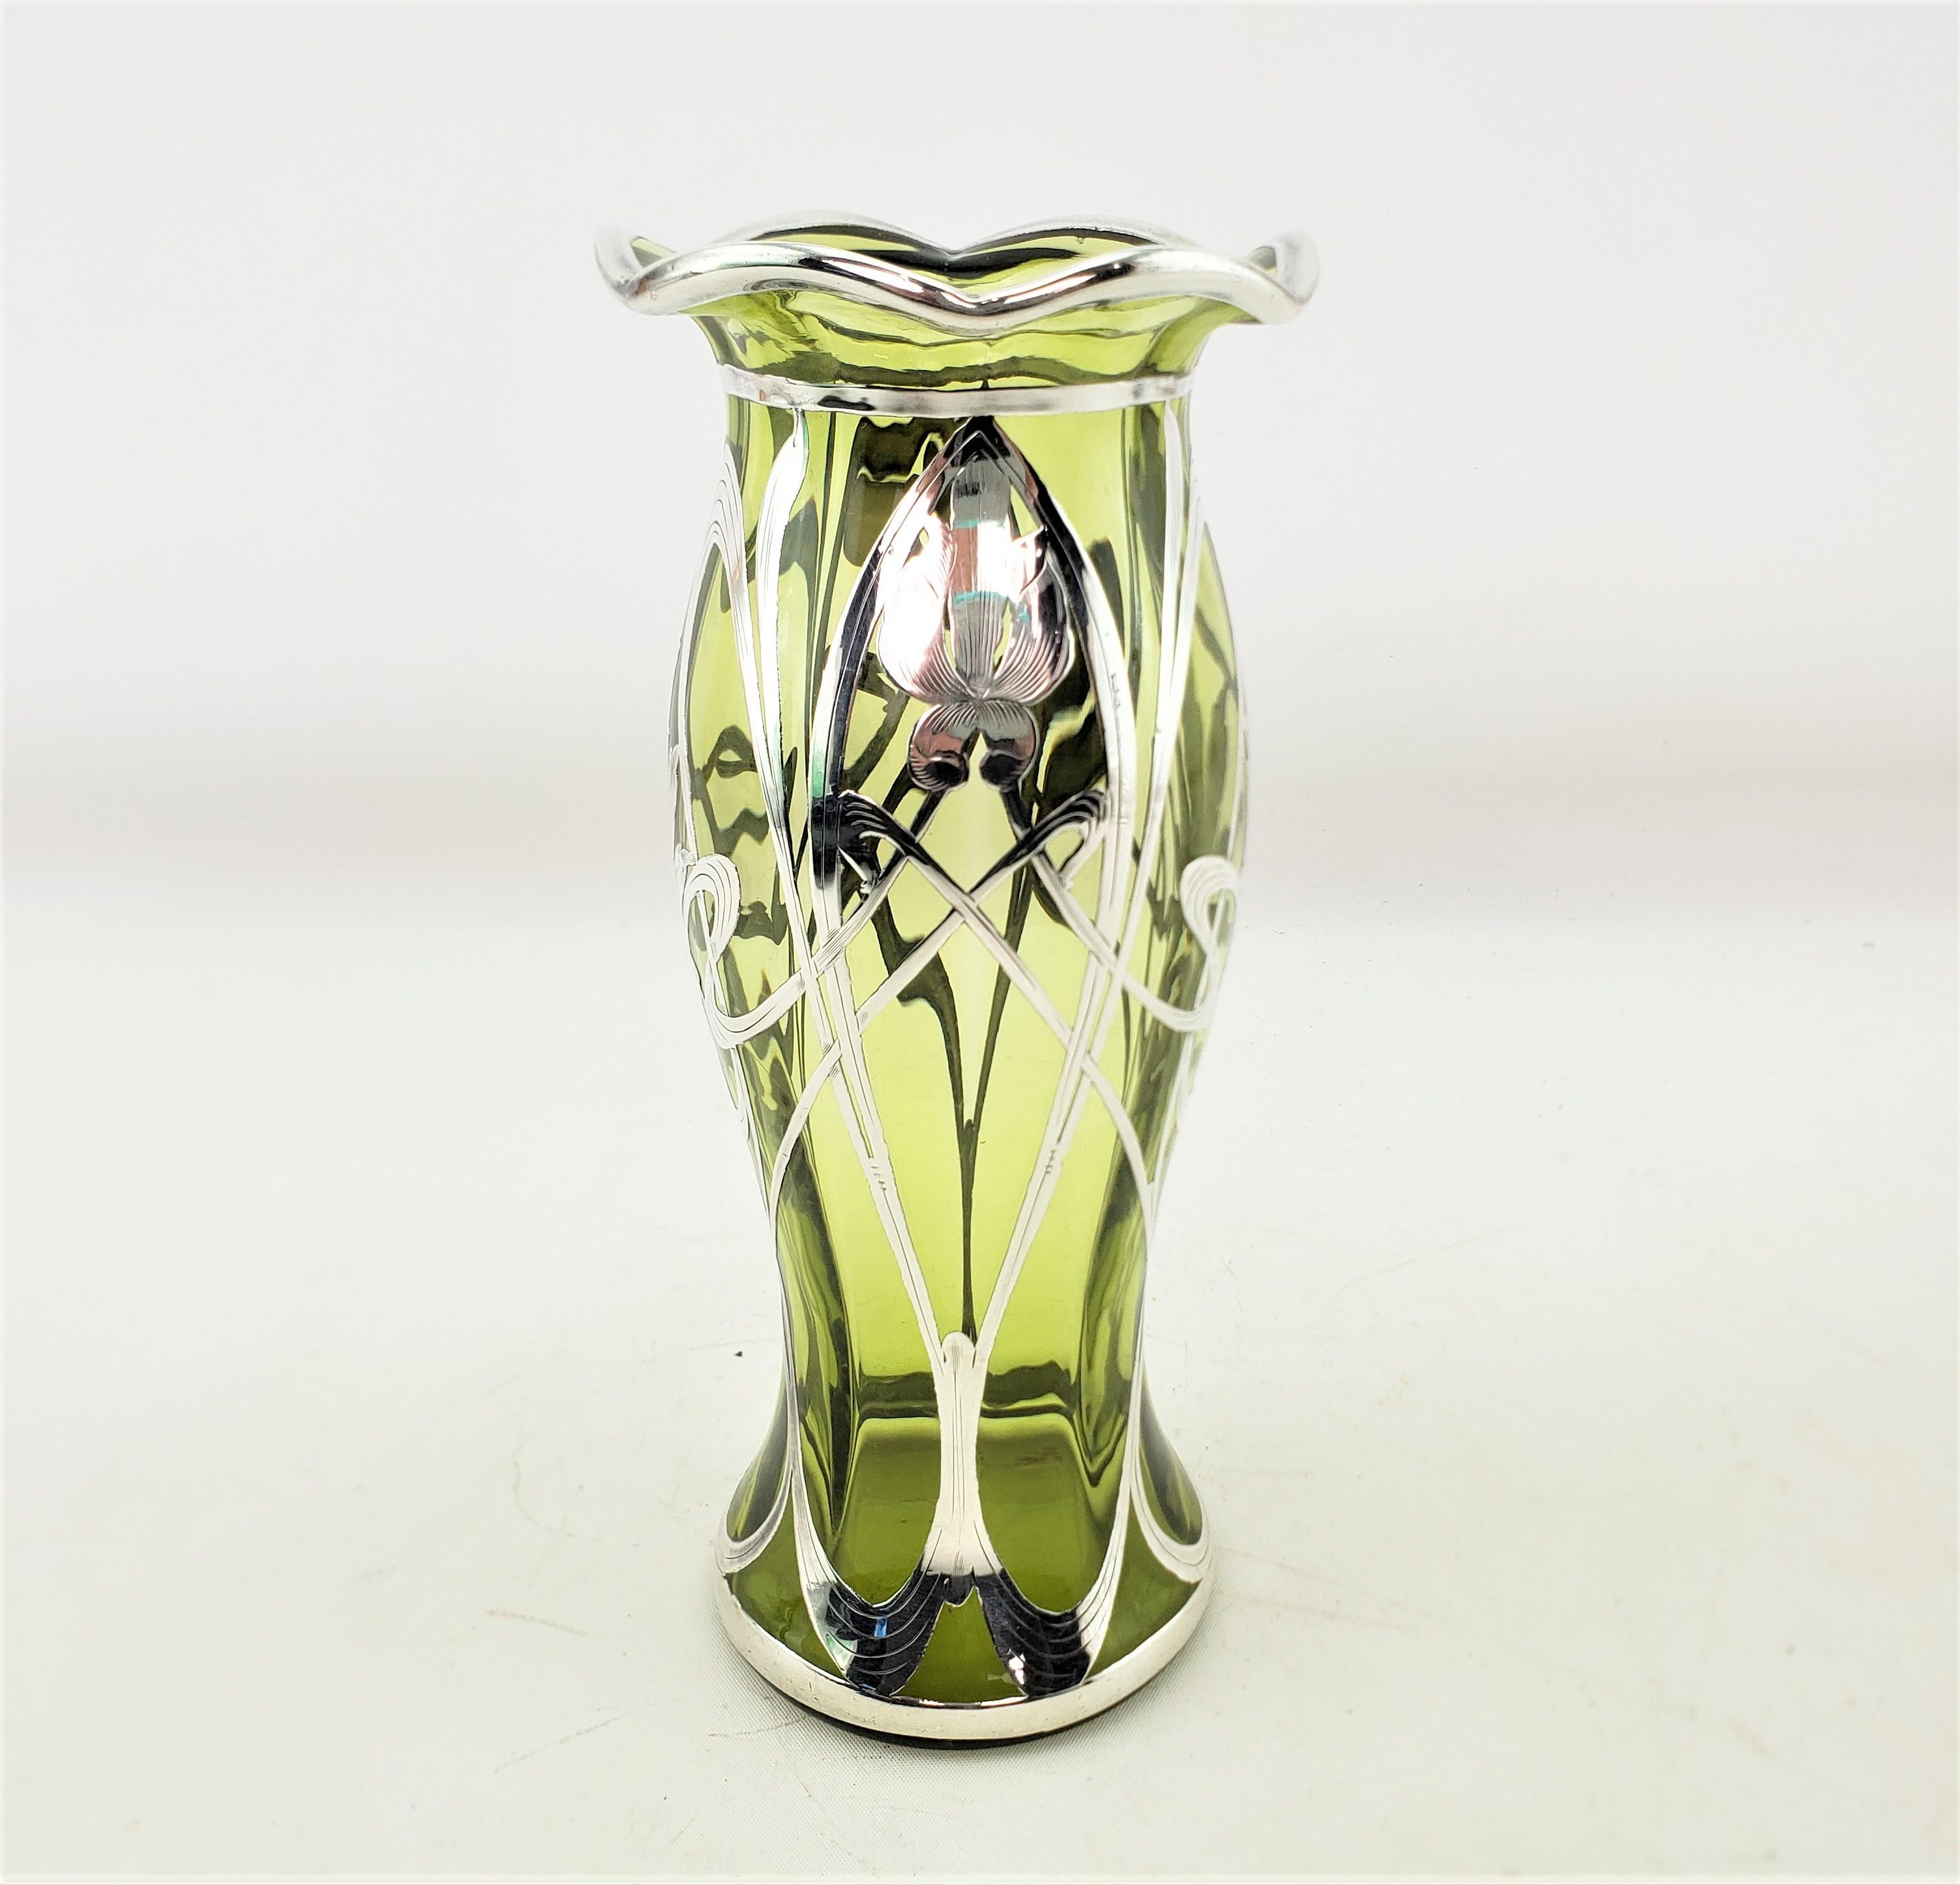 Antique Art Nouveau Sterling Silver Overlay Green Glass Vase with Floral Motif For Sale 1